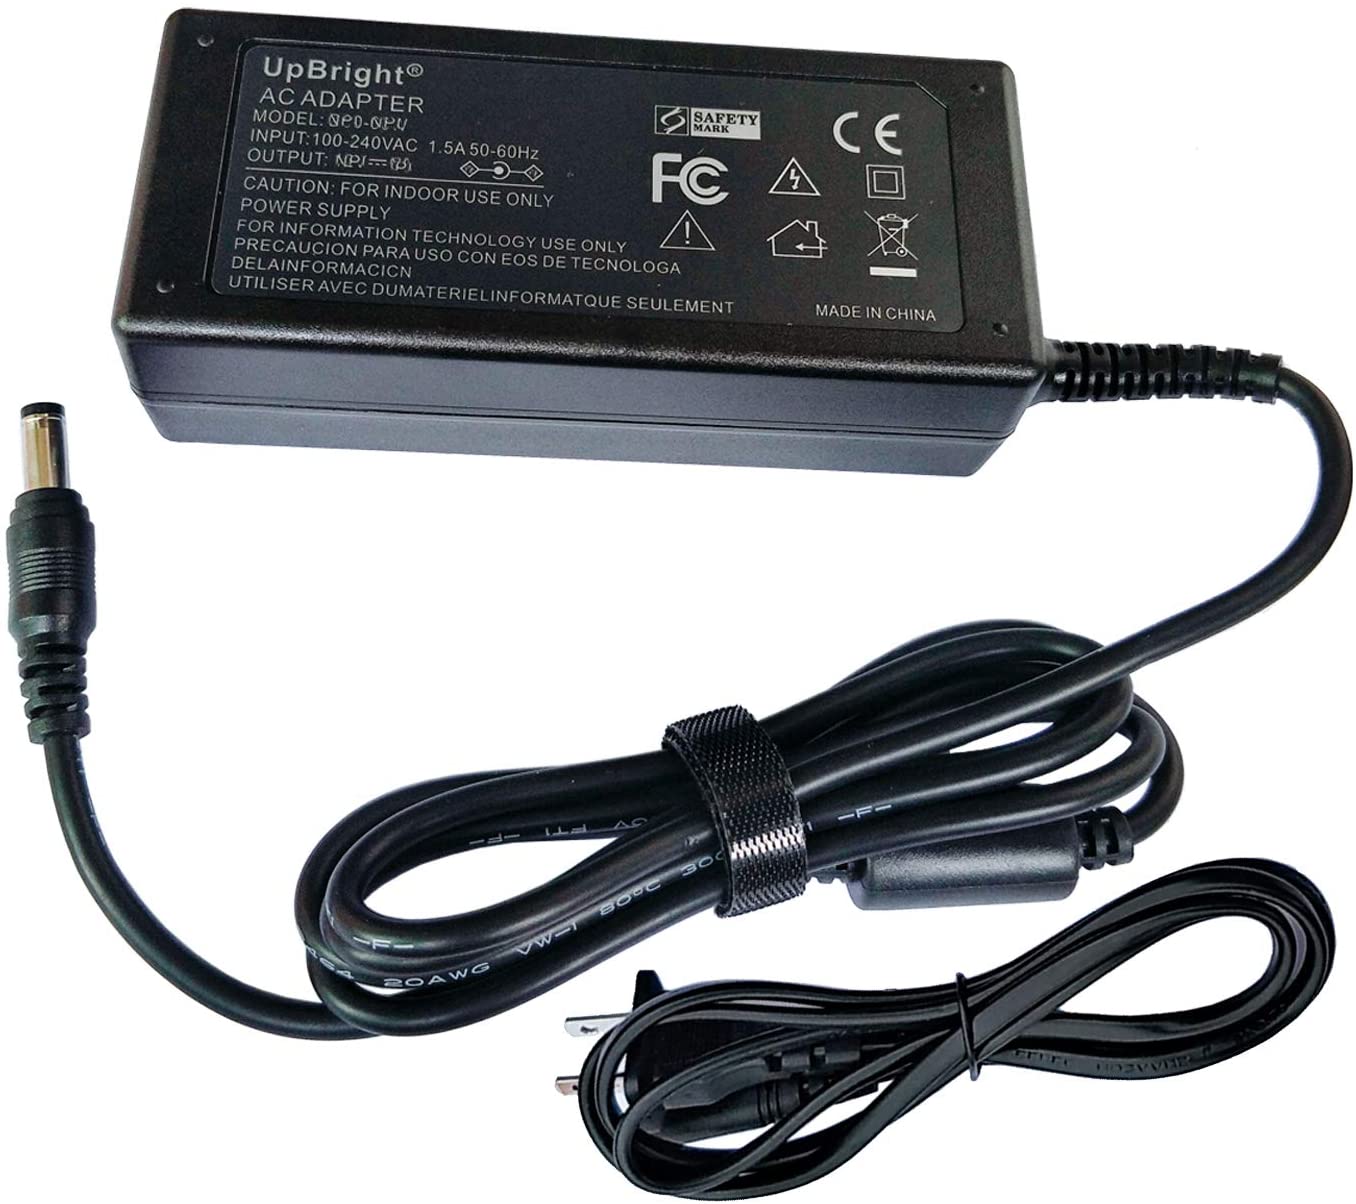 UPBRIGHT NEW Global AC / DC Adapter For Kodak 1877398 Scan Station 710 Sheetfed Scanner Power Supply Cord Cable PS Charger Mains PSU - image 1 of 5